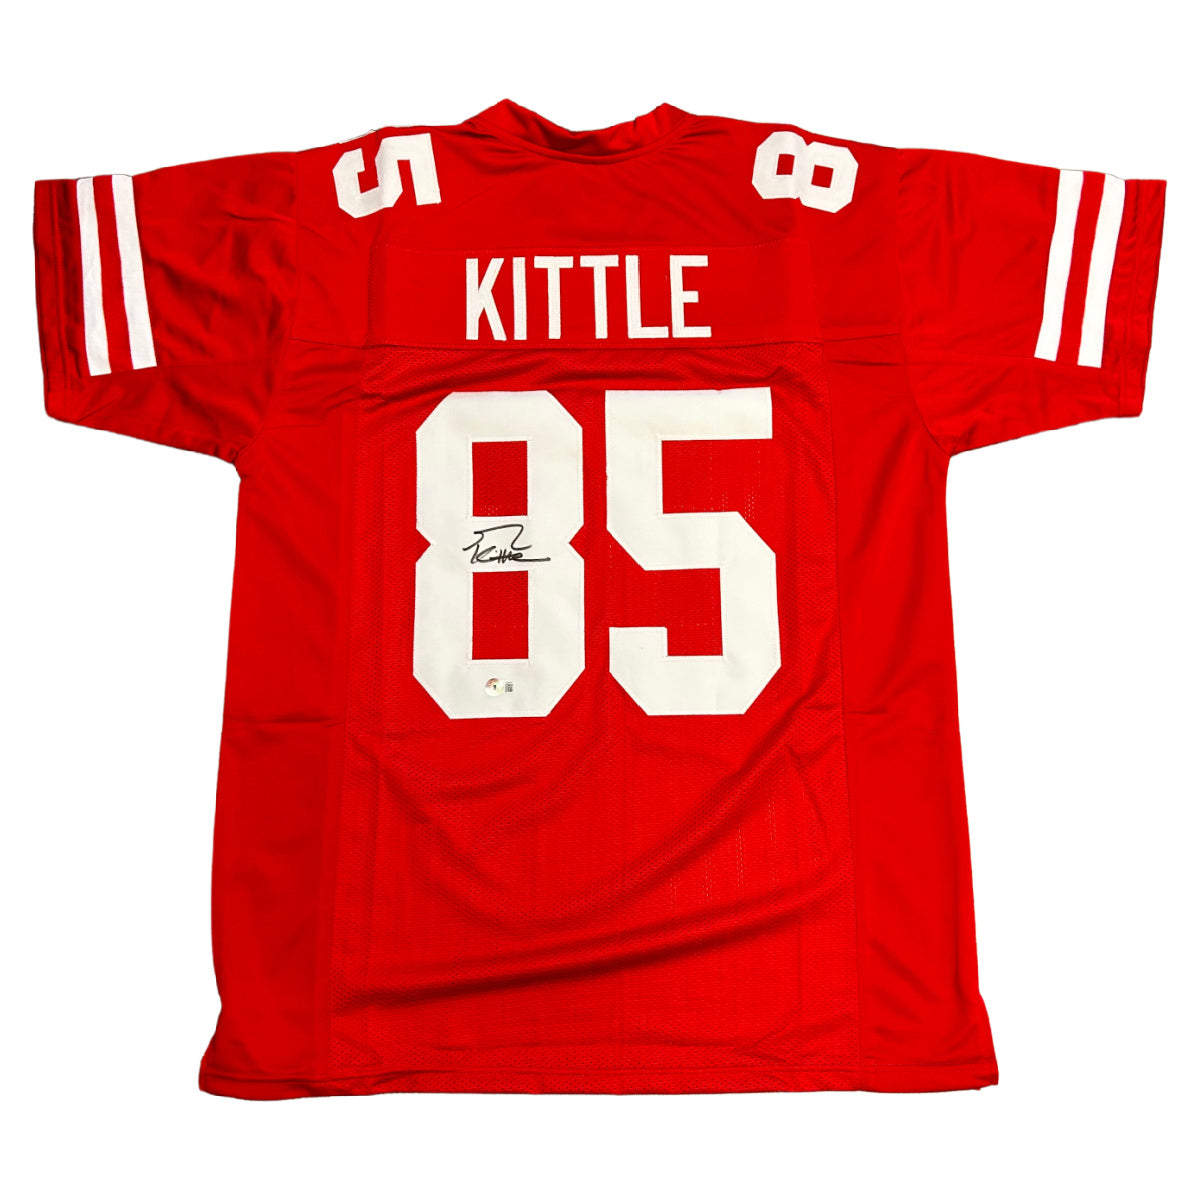 George Kittle Autographed San Francisco 49ers Red Pro Style Jersey Beckett COA